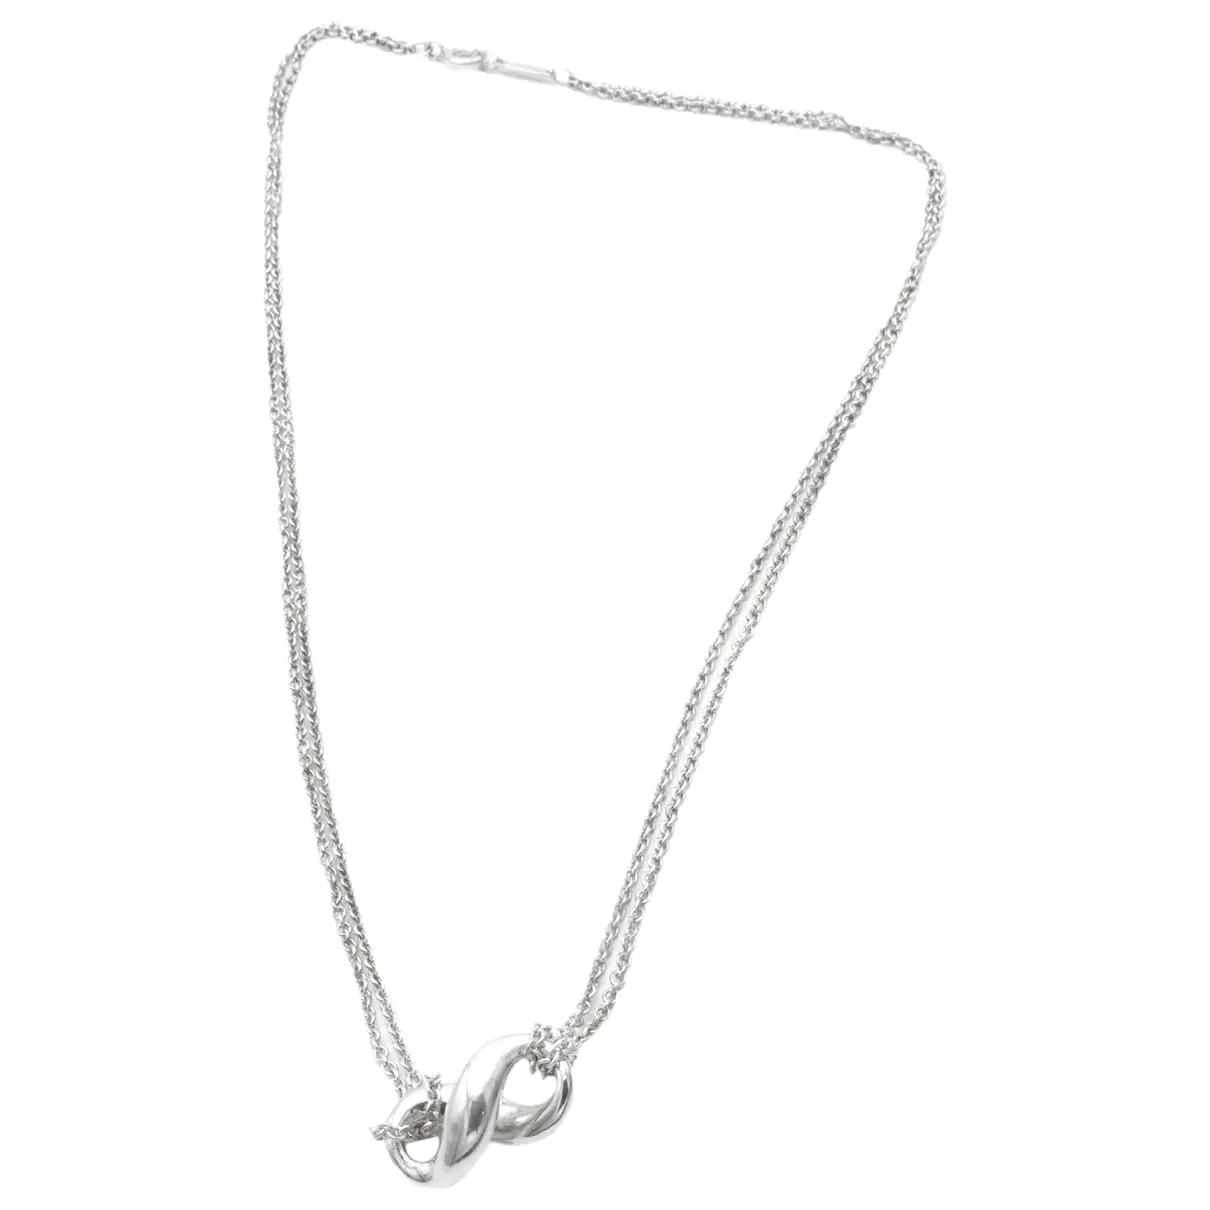 Tiffany Infinity silver necklace